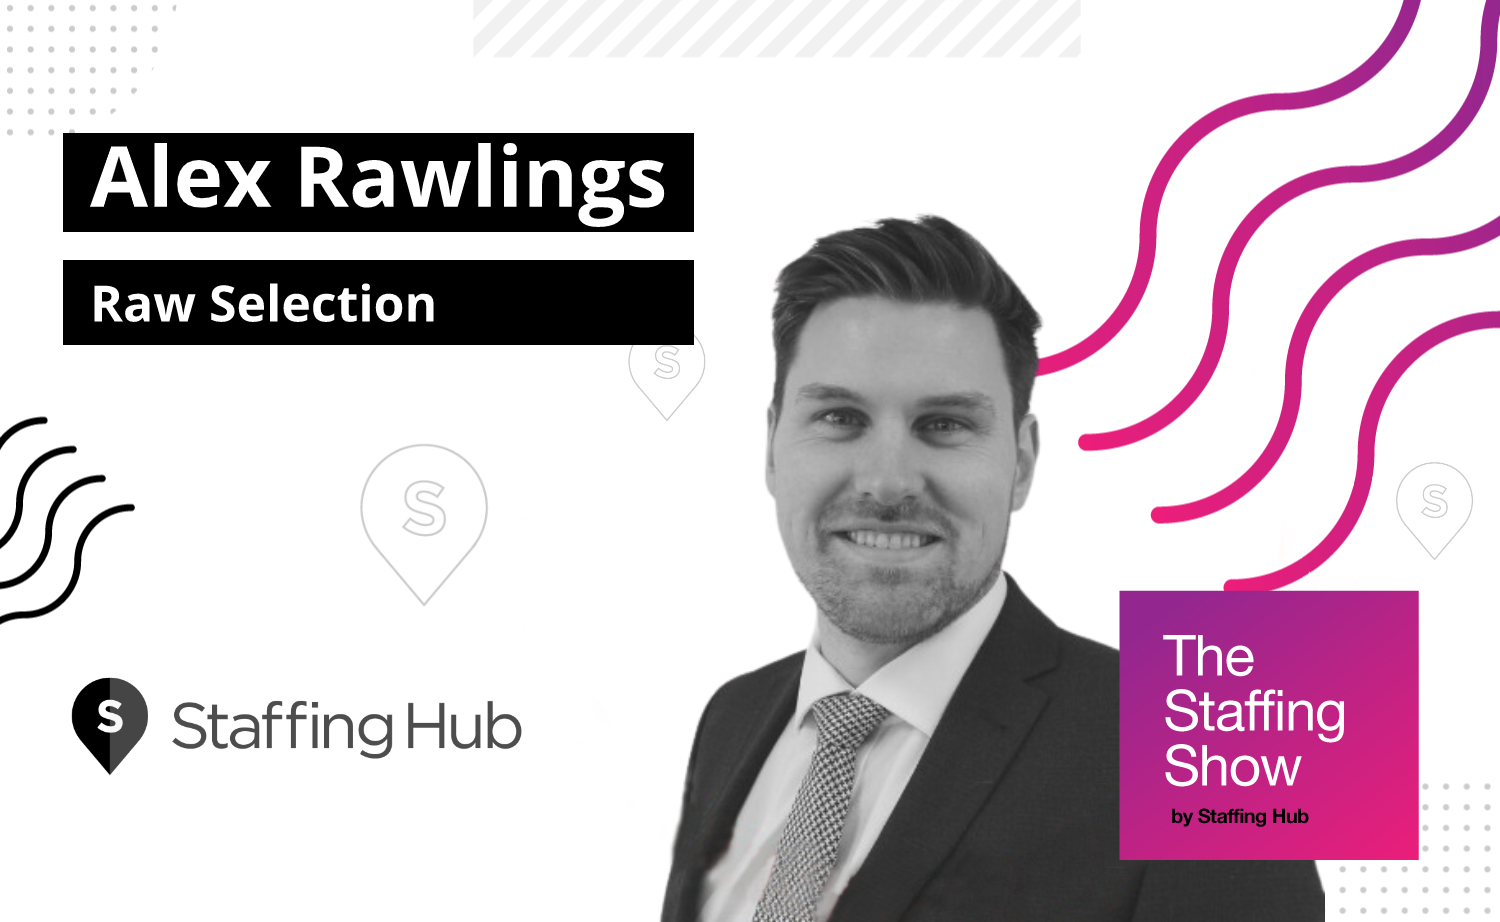 Alex Rawlings, President and Founder of Raw Selection, on Building an Effective Training Framework